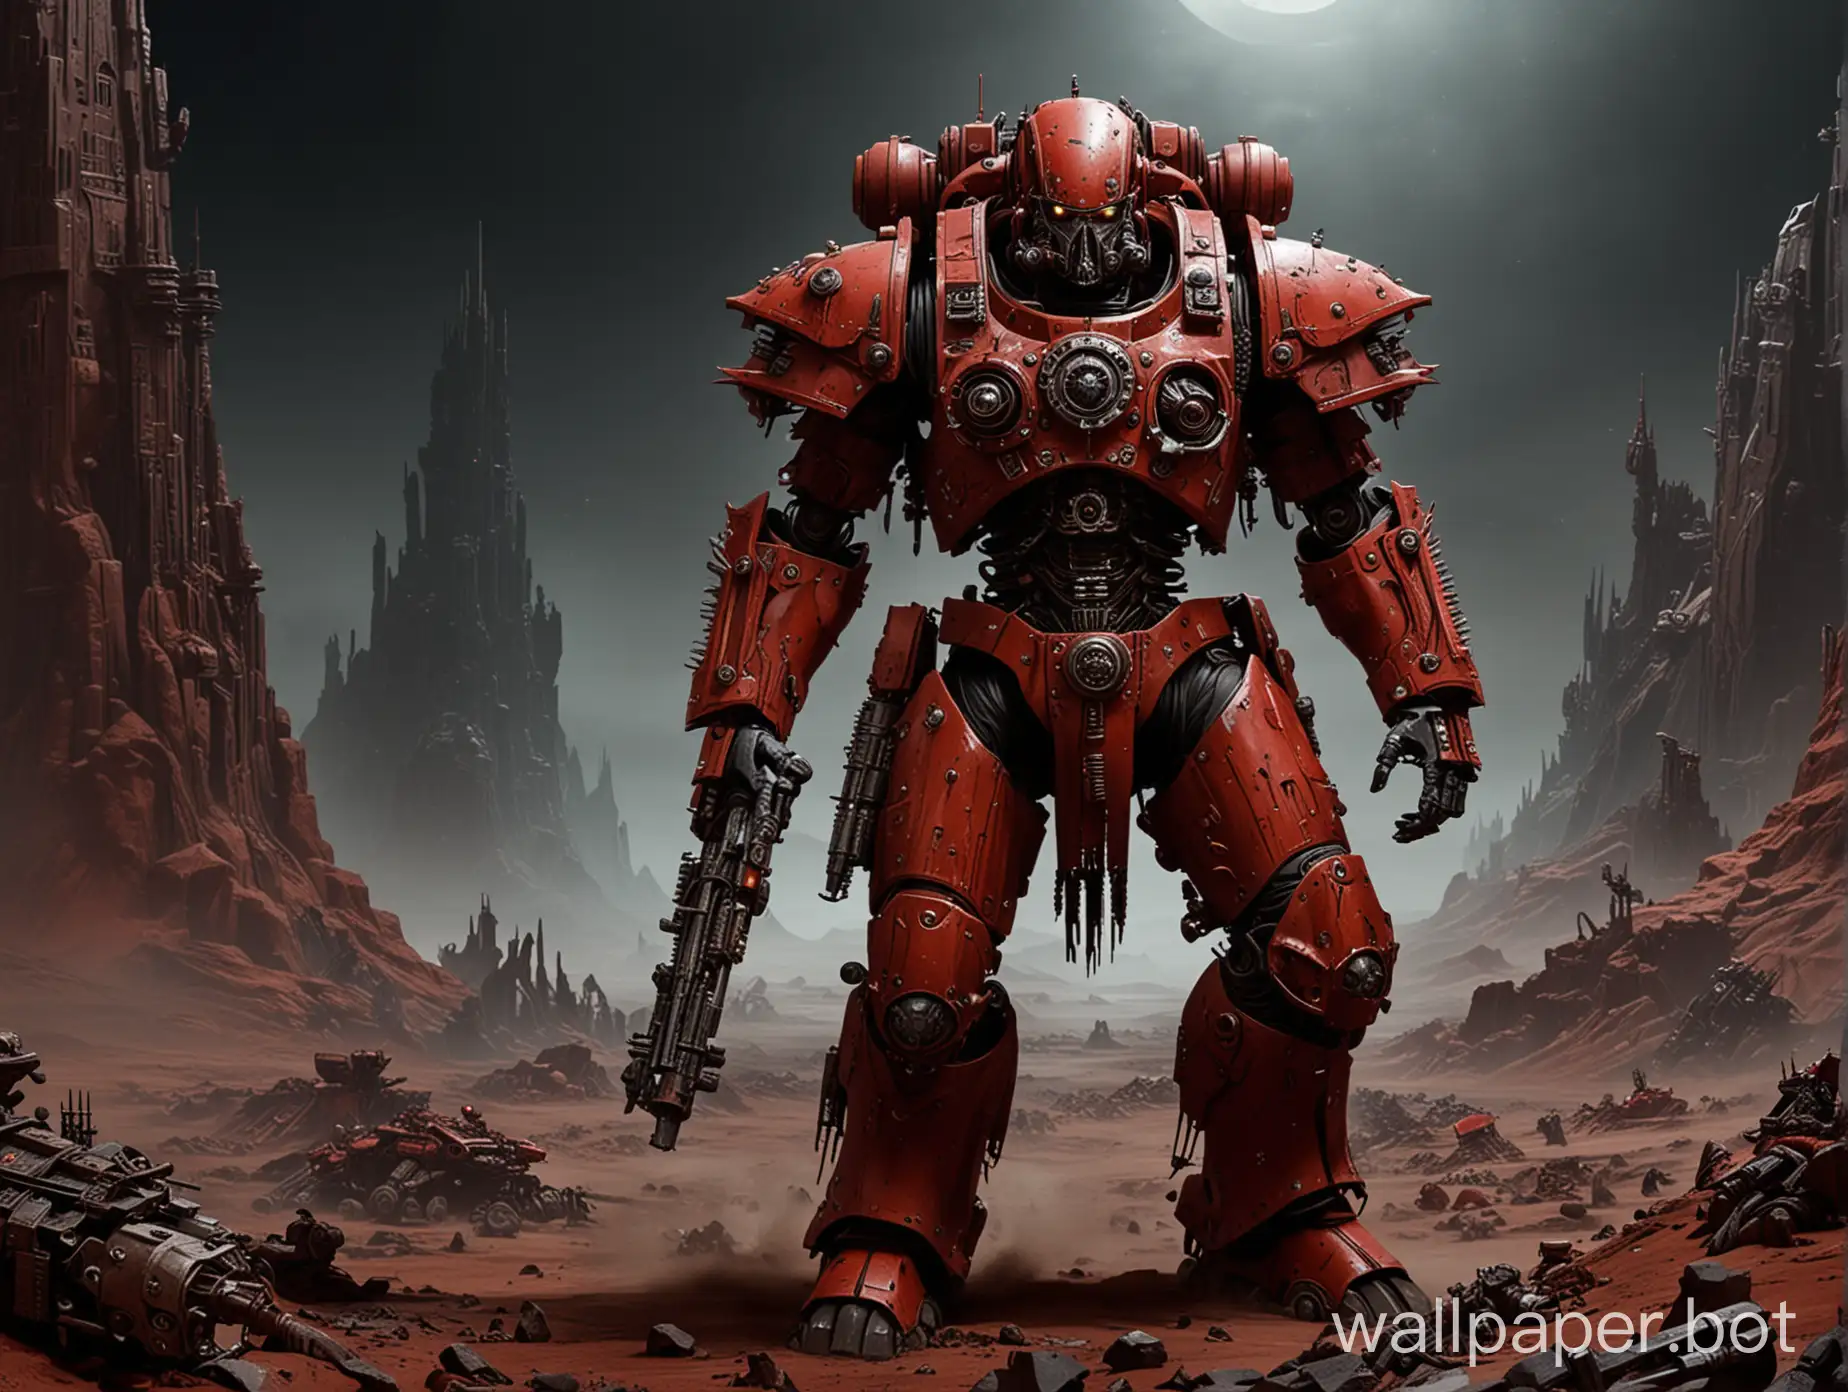 Adeptus Mechanicus from Warhammer 40000 goes on an alien planet, in the genre of science fiction, in red armor, dark background